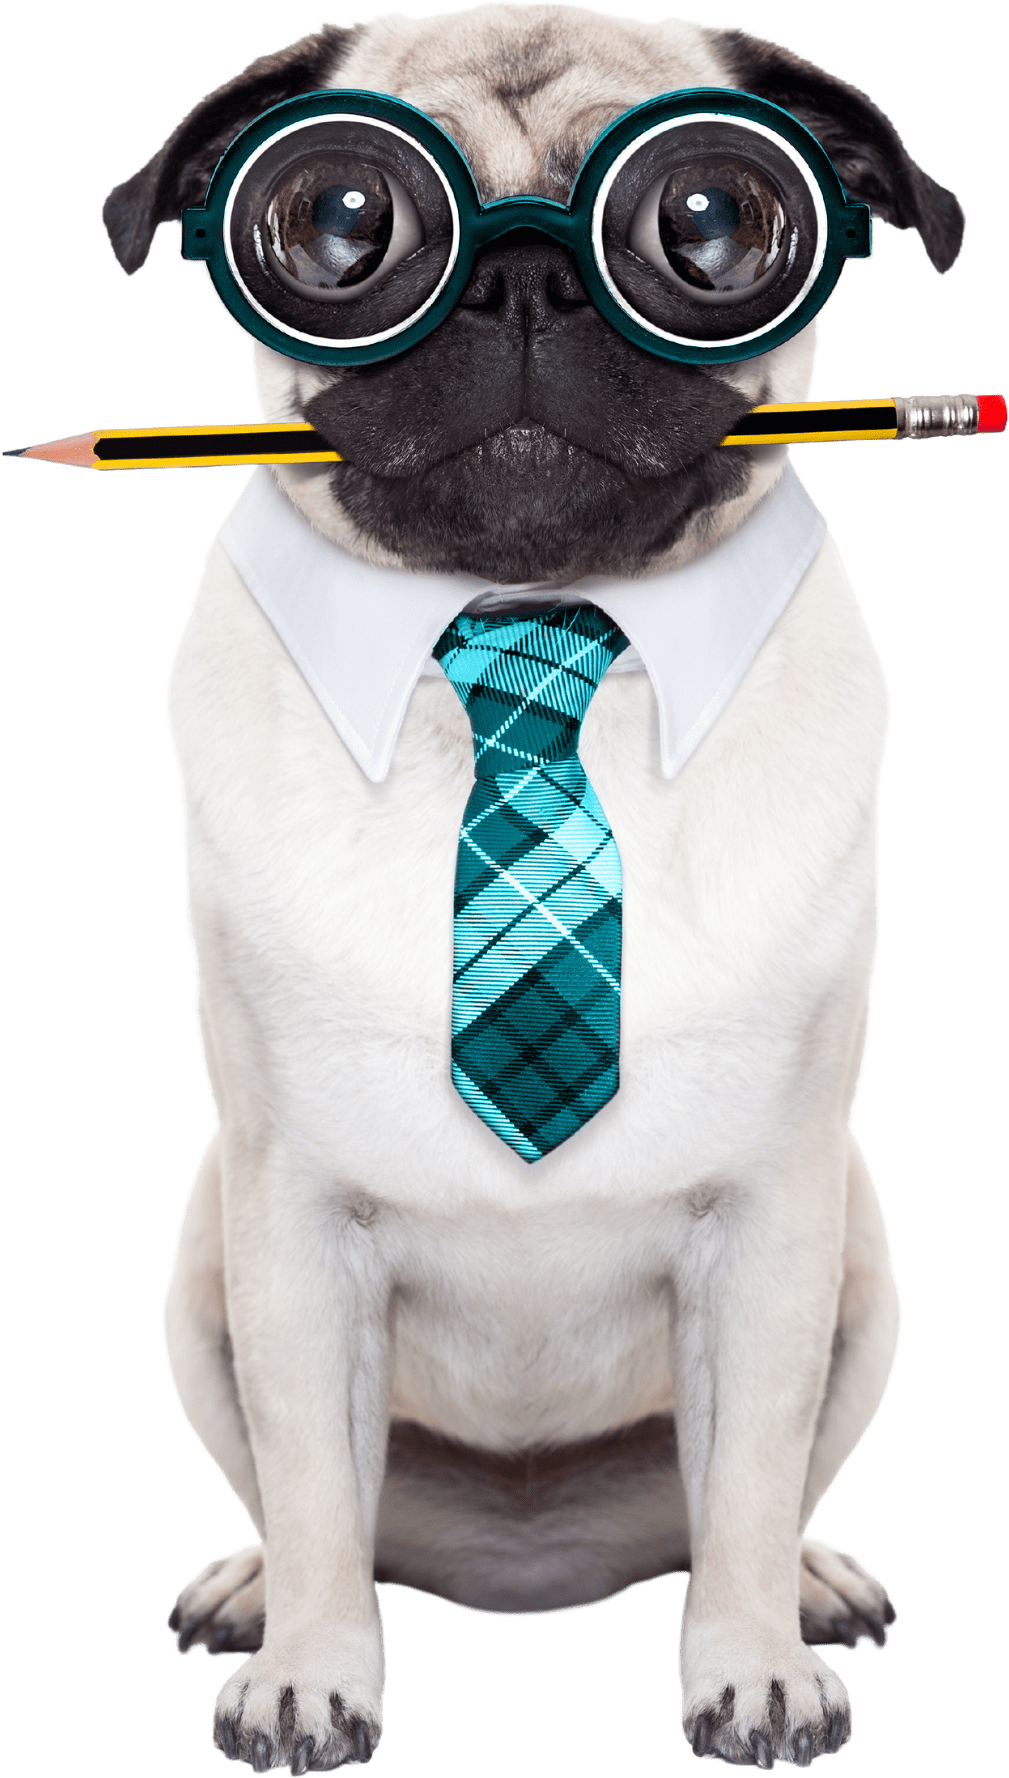 A pug looks at the camera. It wears large, turquoise coke-bottle glasses and a plaid turquoise necktie. In its mouth is a yellow and black pencil.